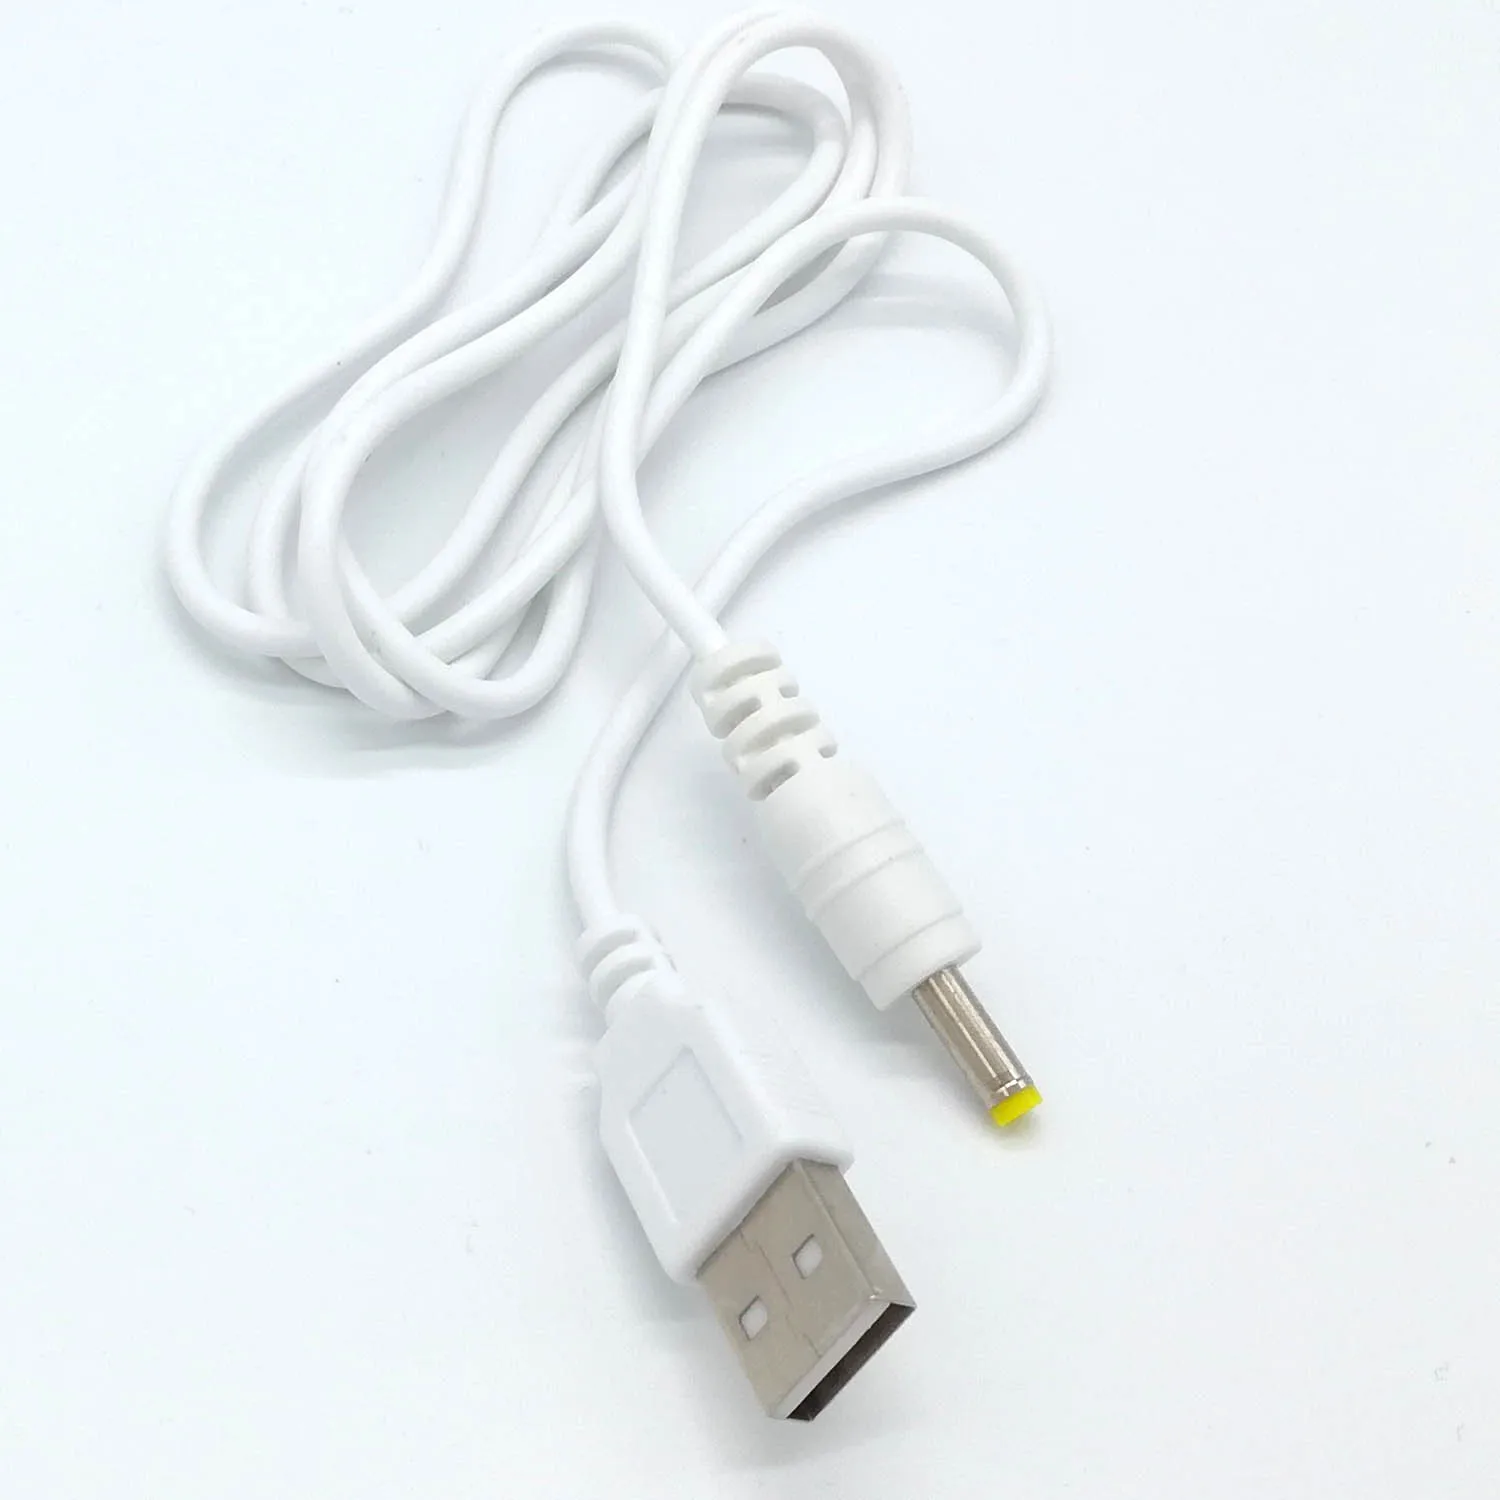 USB Power Cable for Fujifilm Instax Share Sp-1 Instant Film Printer 